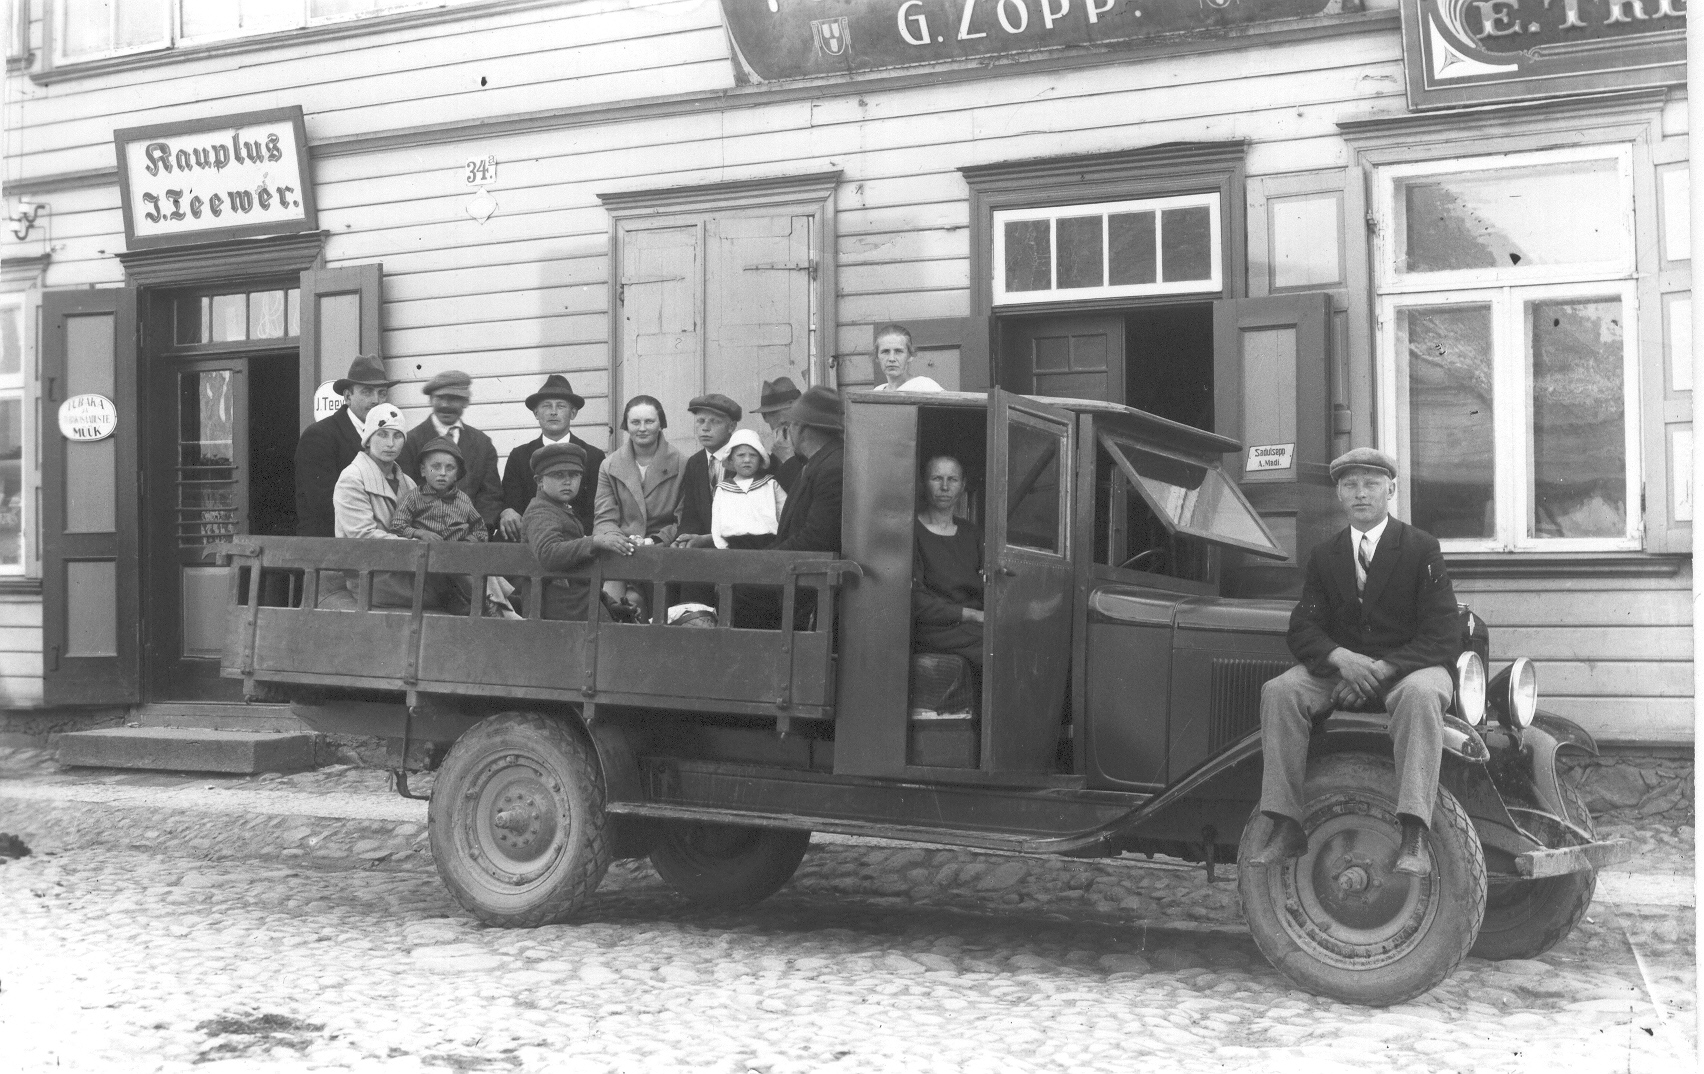 Photo. Truck with passengers.